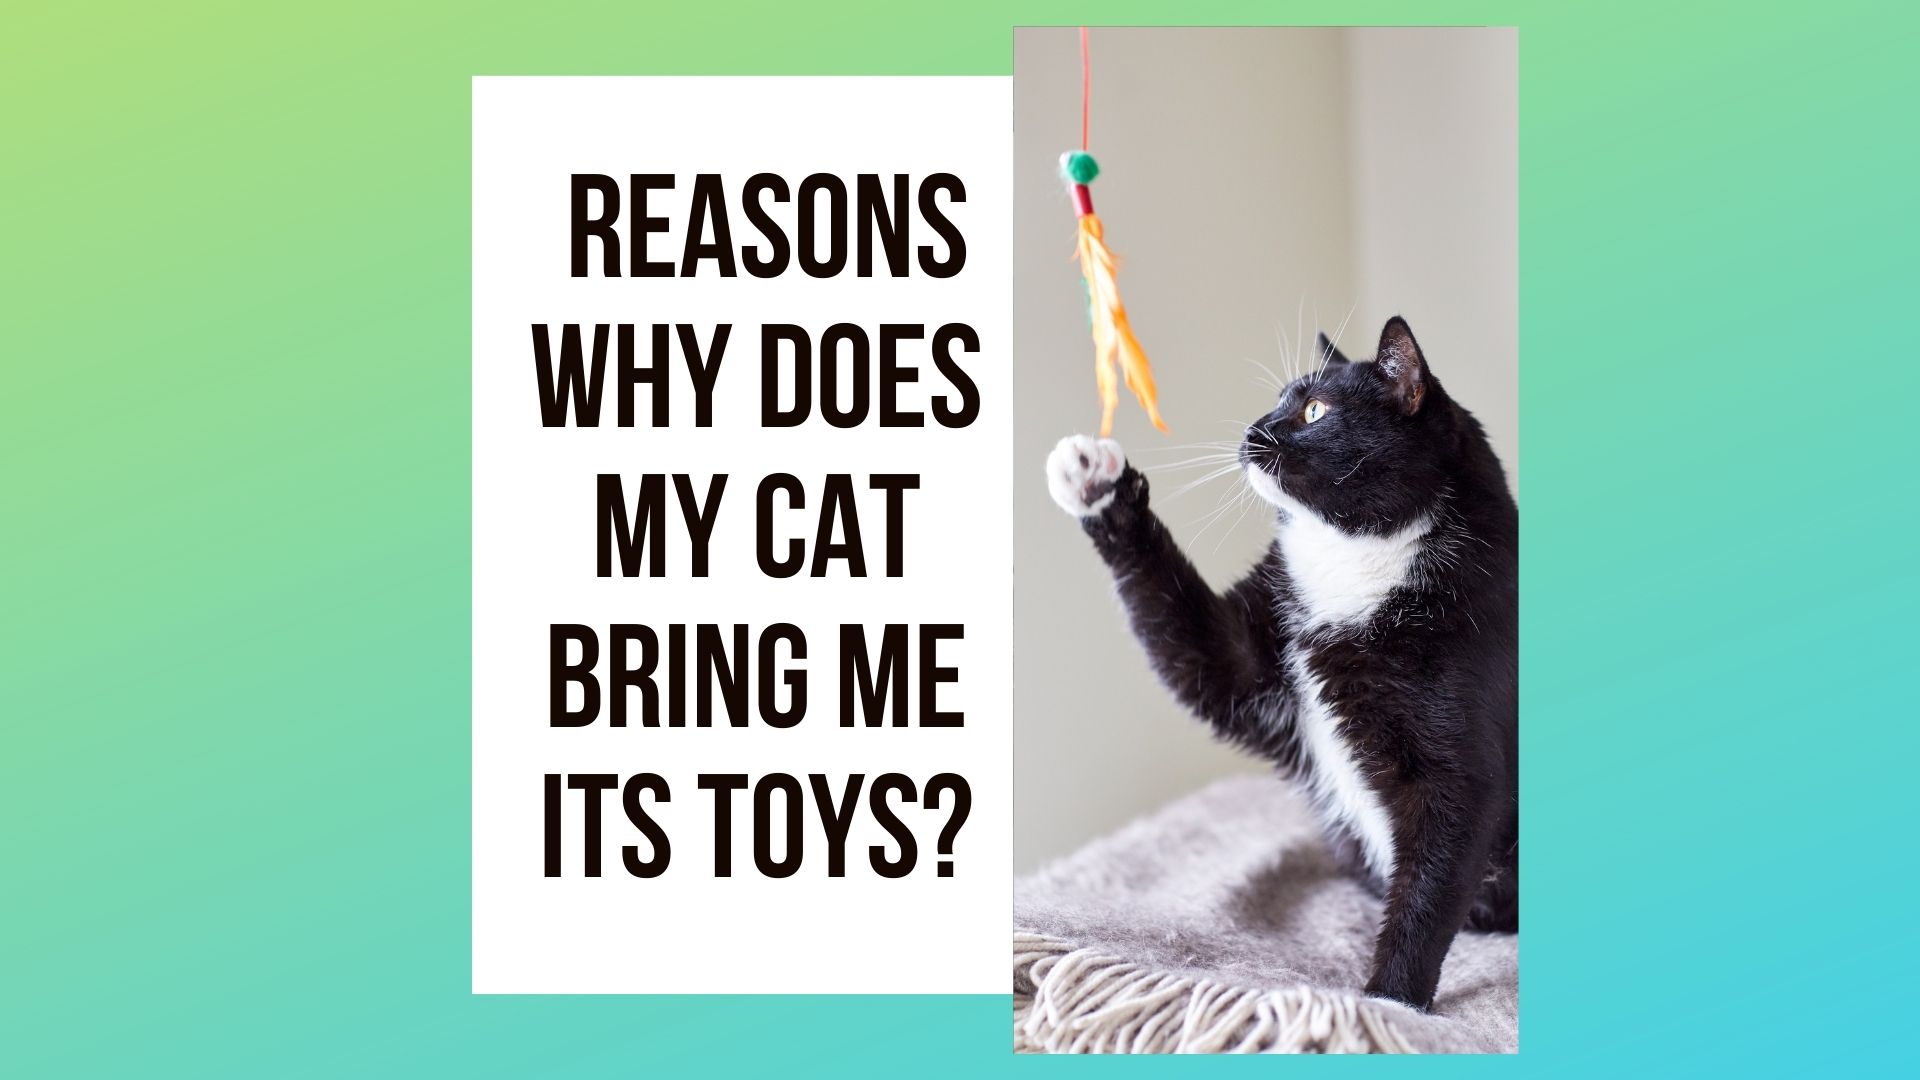 Why Does My Cat Bring Me Its Toys?